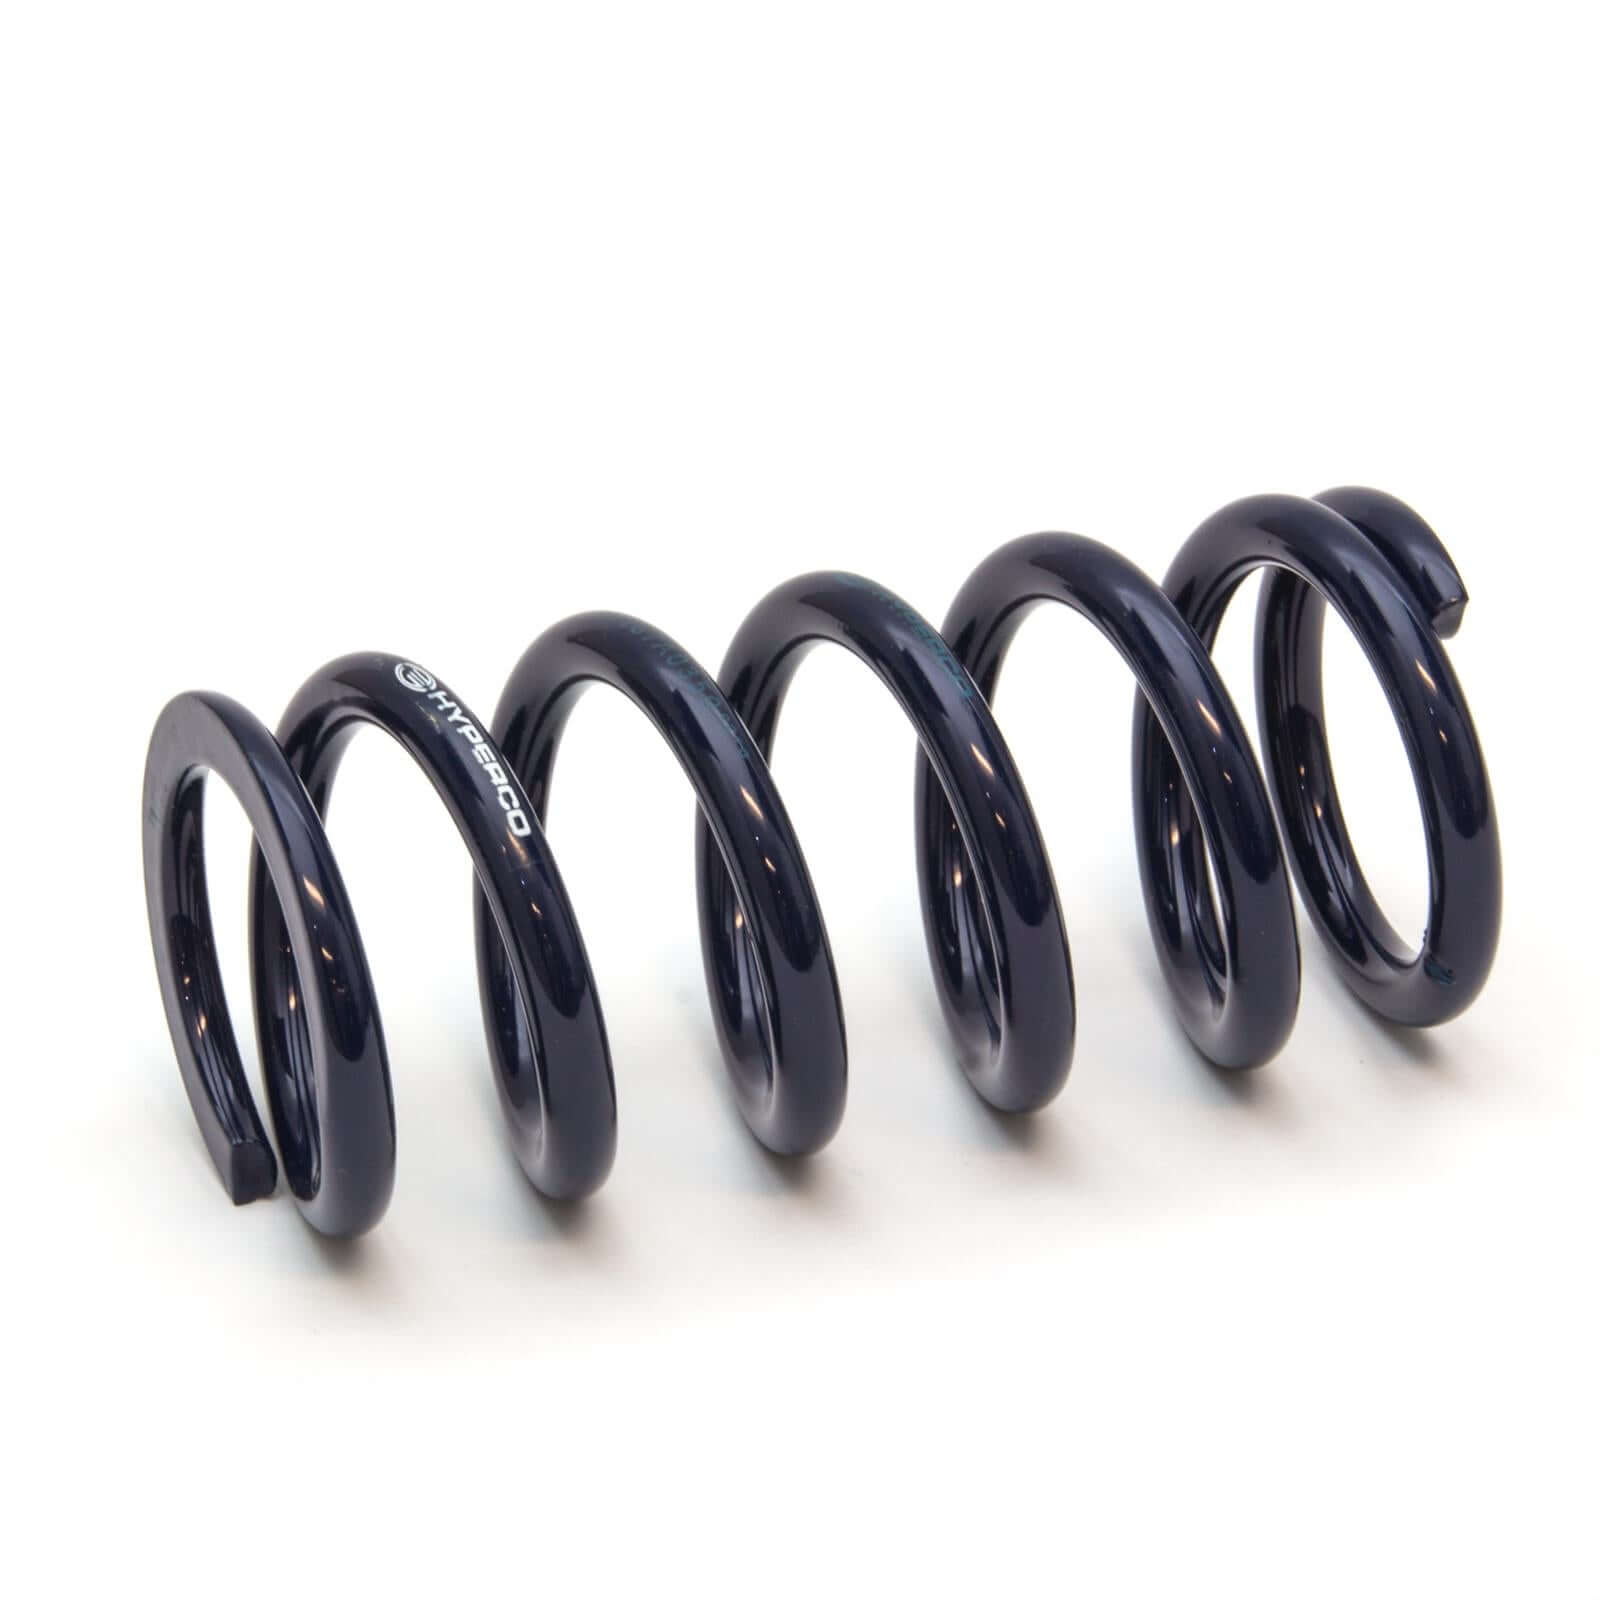 Spec E46: Coilover Springs (Fronts, Each) - $92.00